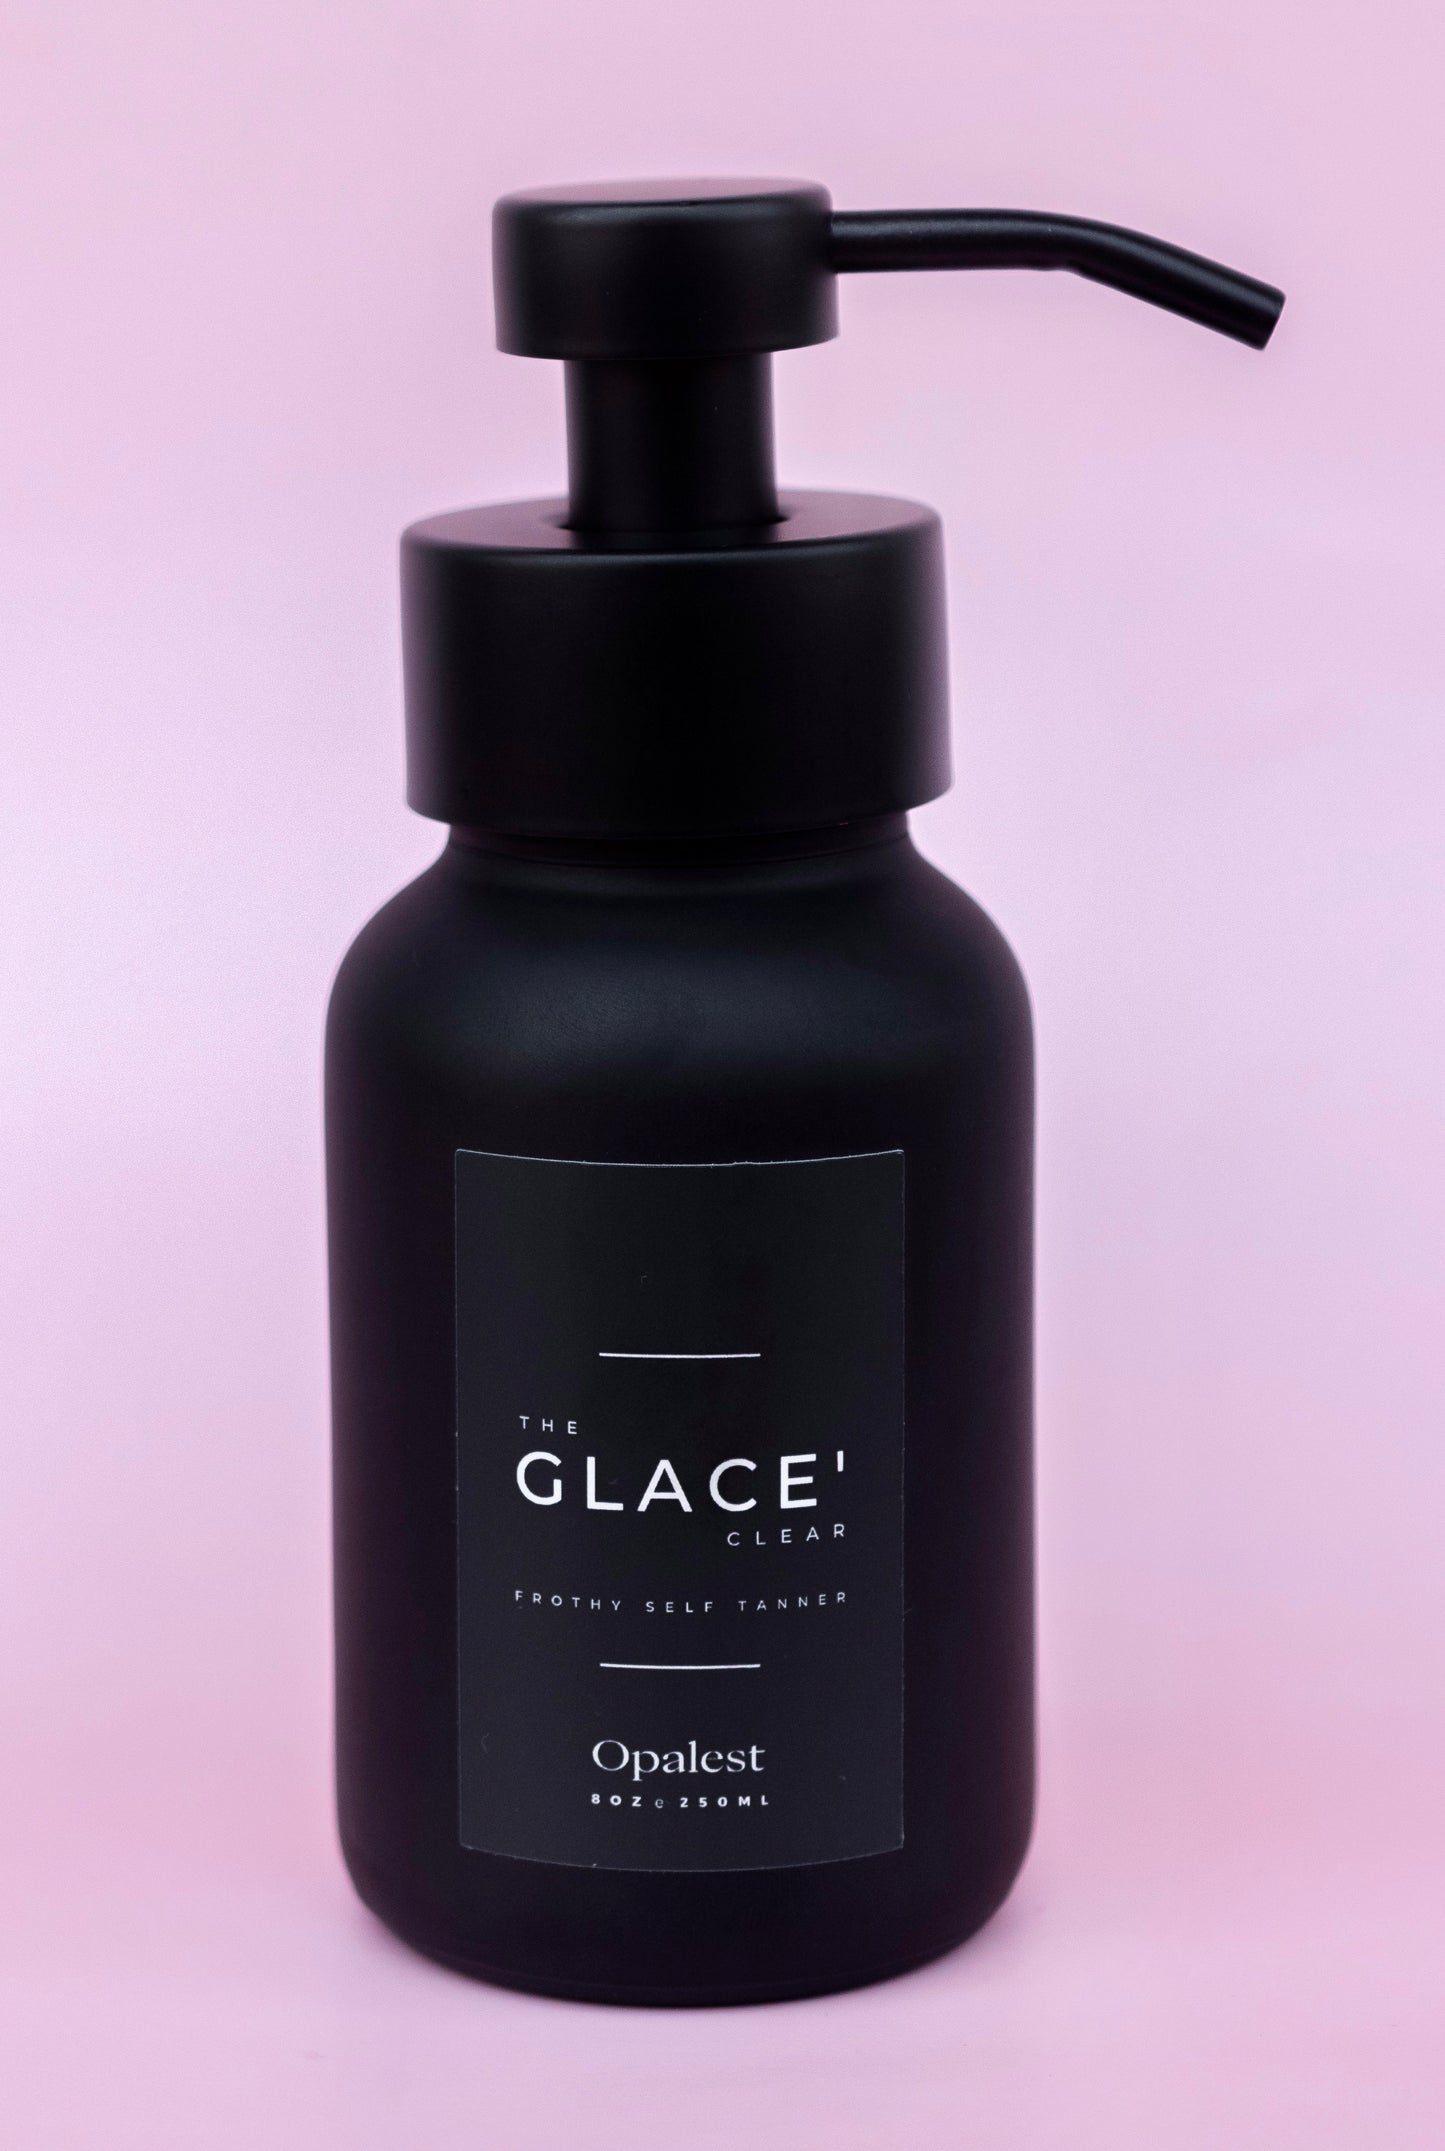 Glace' -Clear Frothy Self Tanner